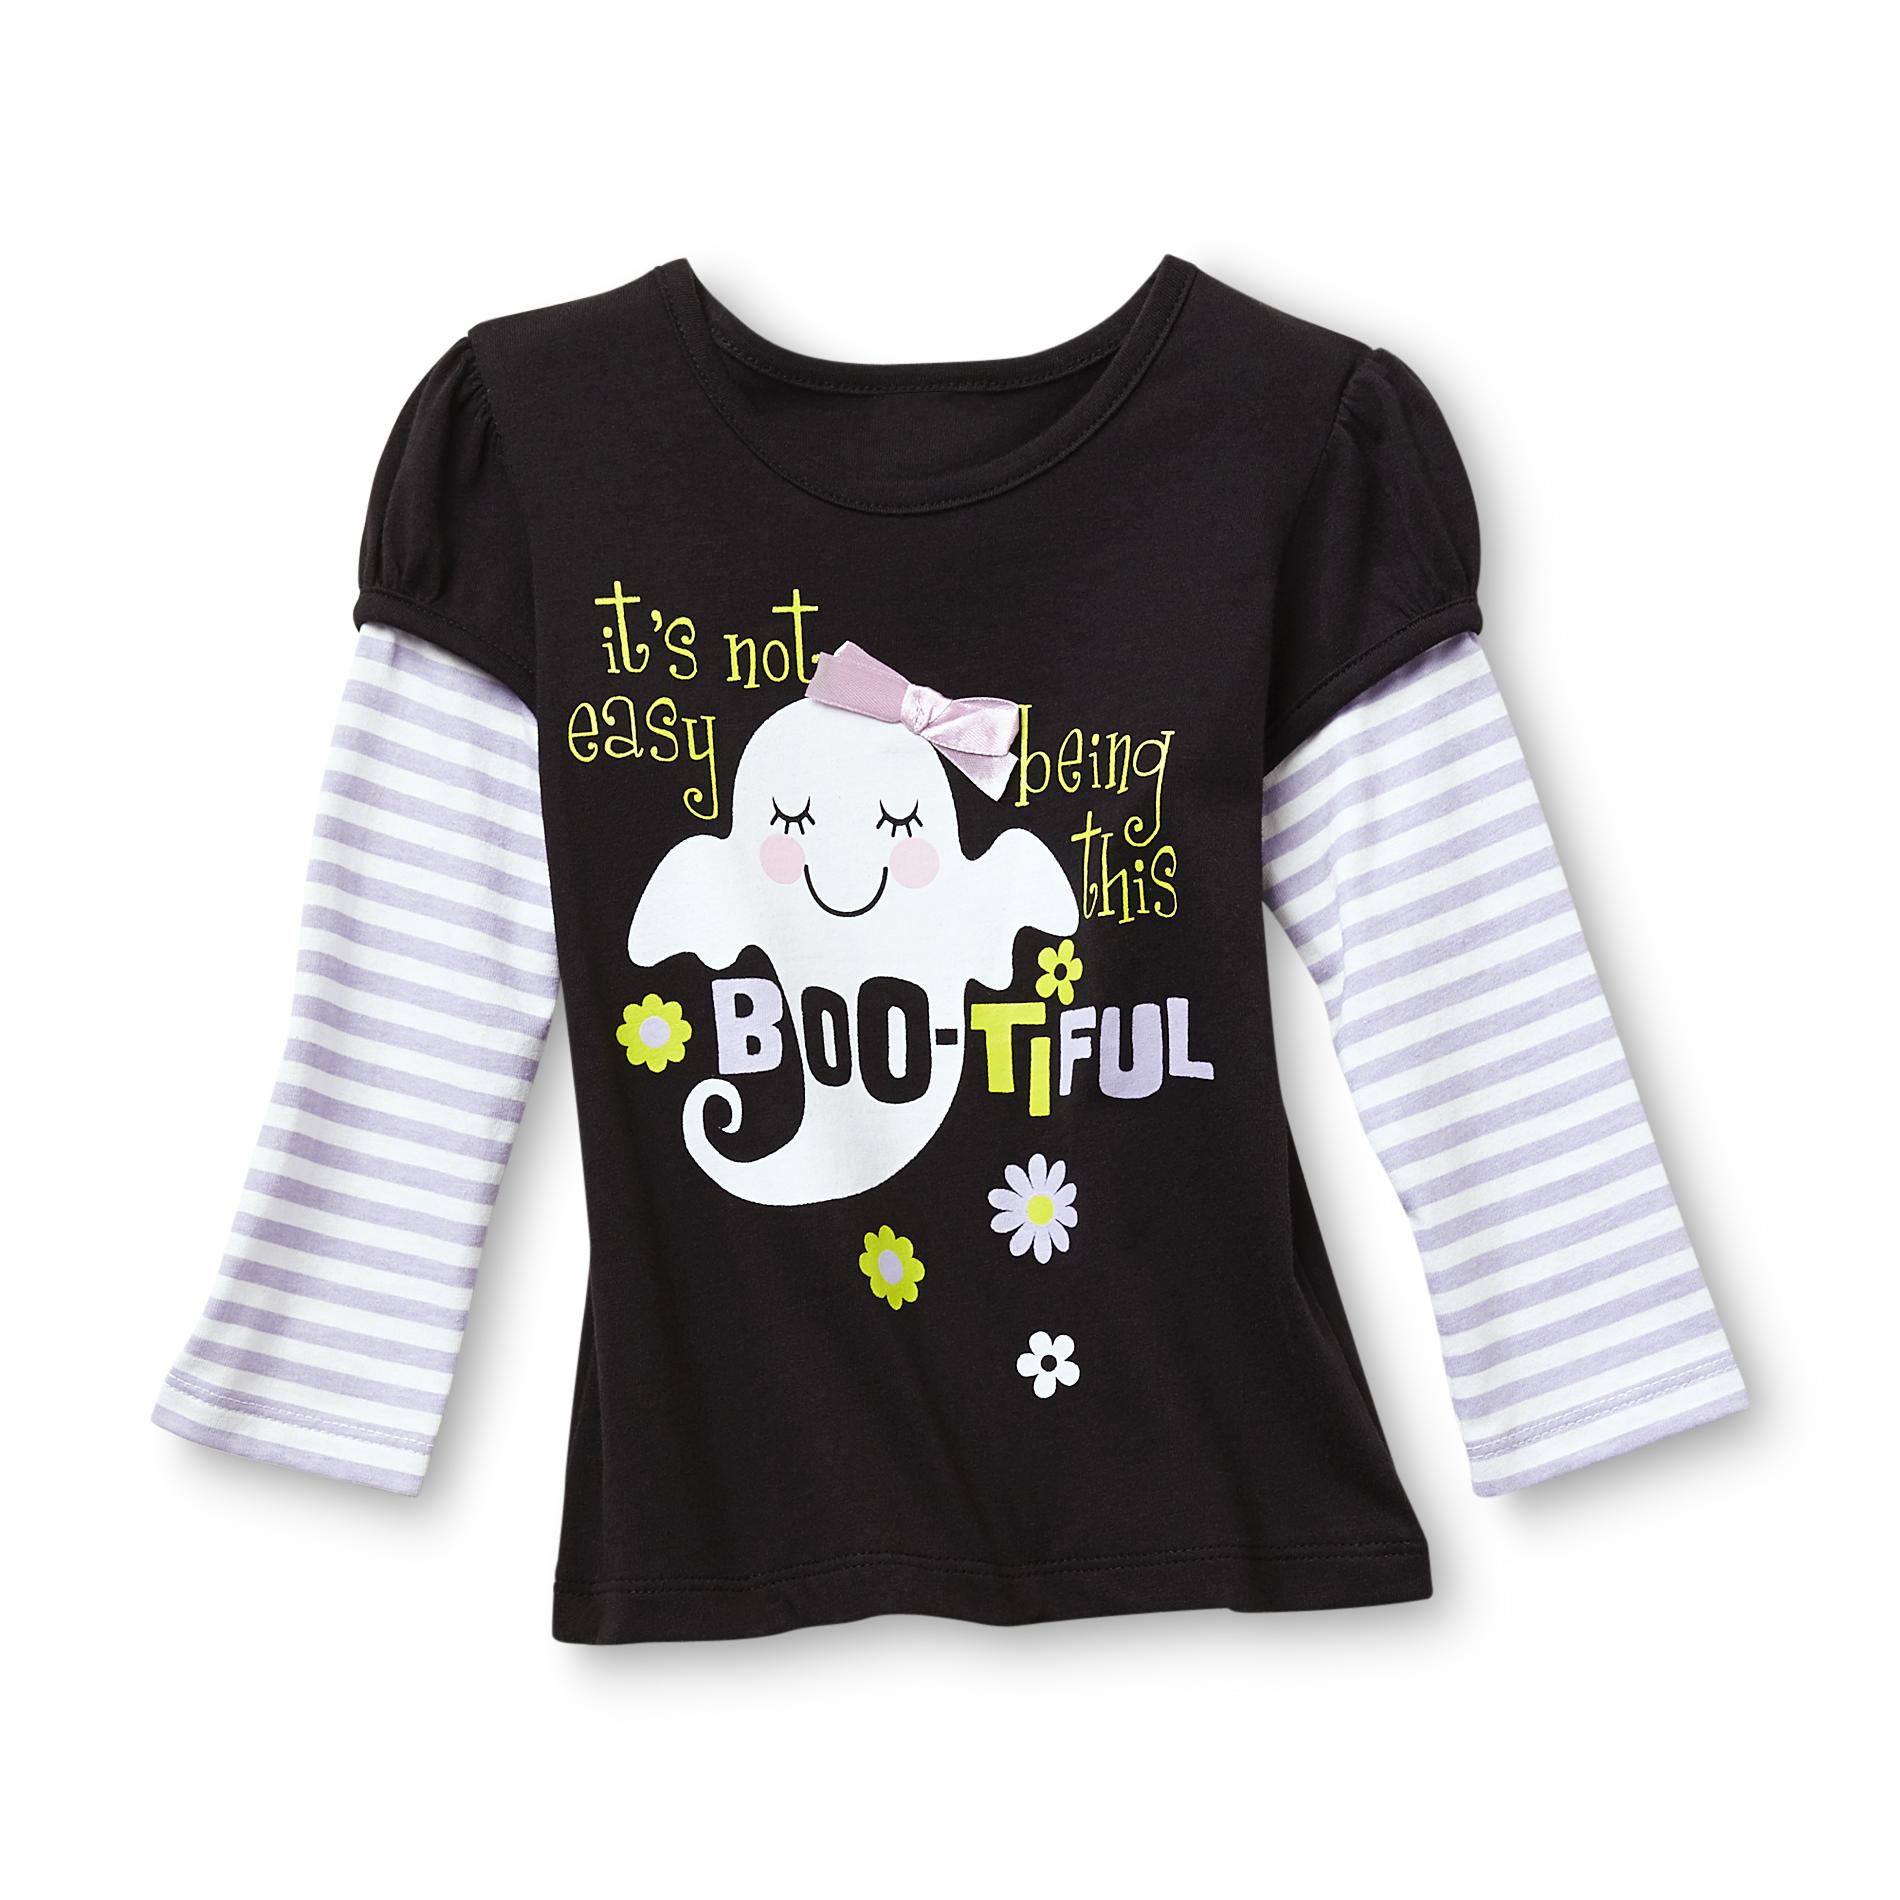 Holiday Editions Infant & Toddler Girl's Long-Sleeve Shirt - Boo-tiful